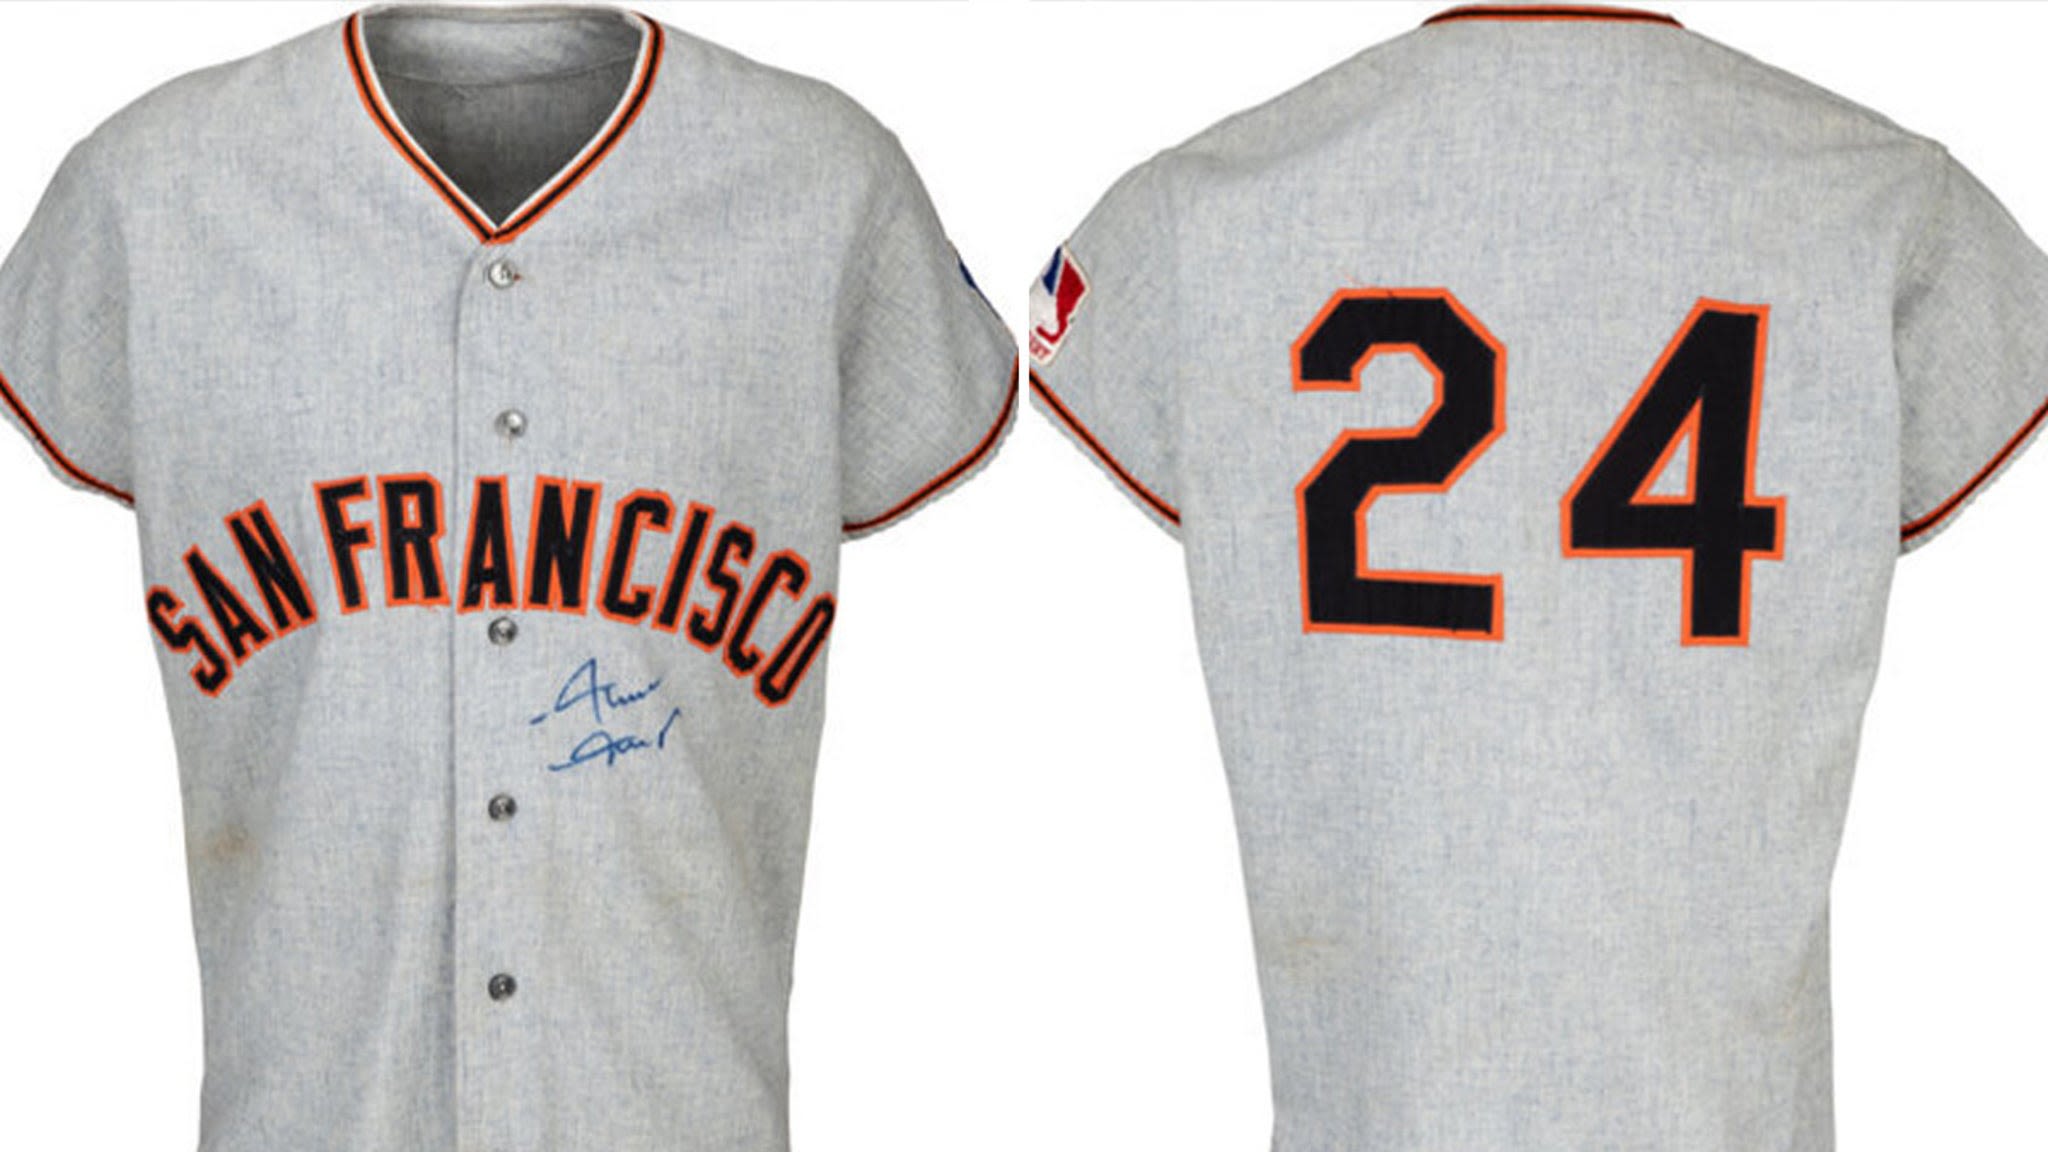 Willie Mays' Signed '69 All-Star Jersey Expected To Fetch $400k At Auction